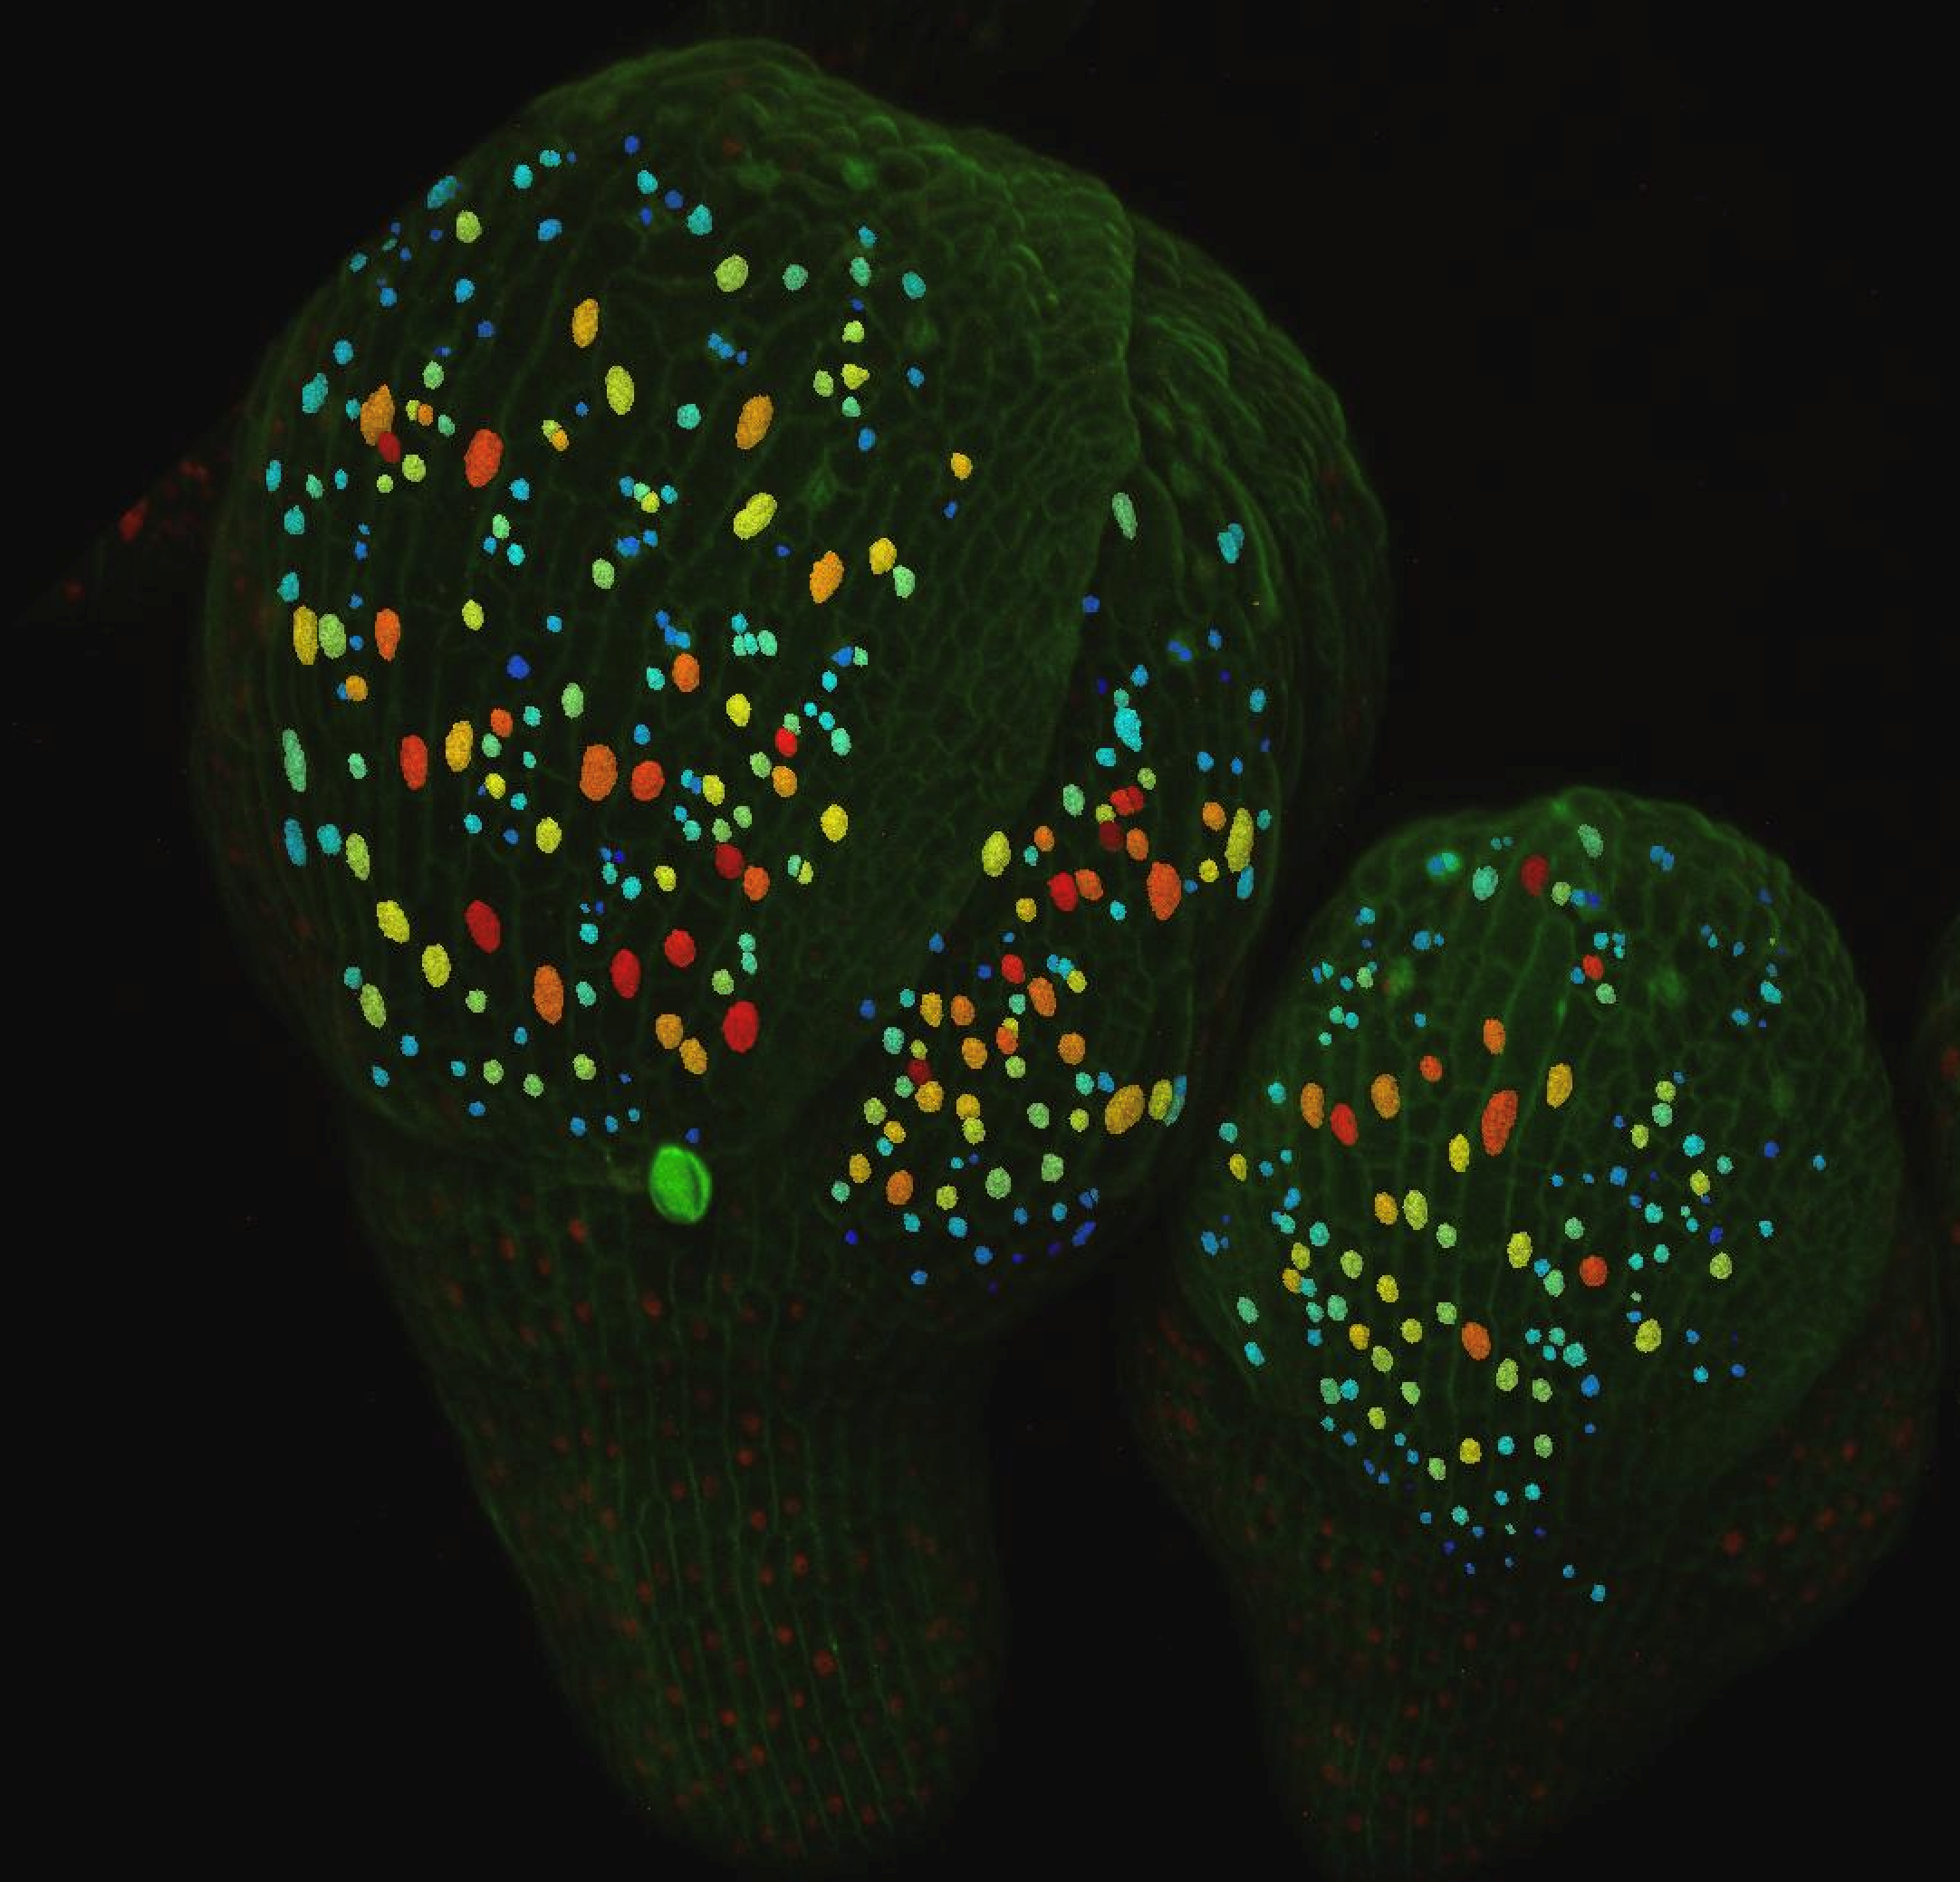 A 3D projection of Arabidopsis flowers where single cell nuclei have been extracted and coloured by expression levels of ATML1 (H. Meyer).